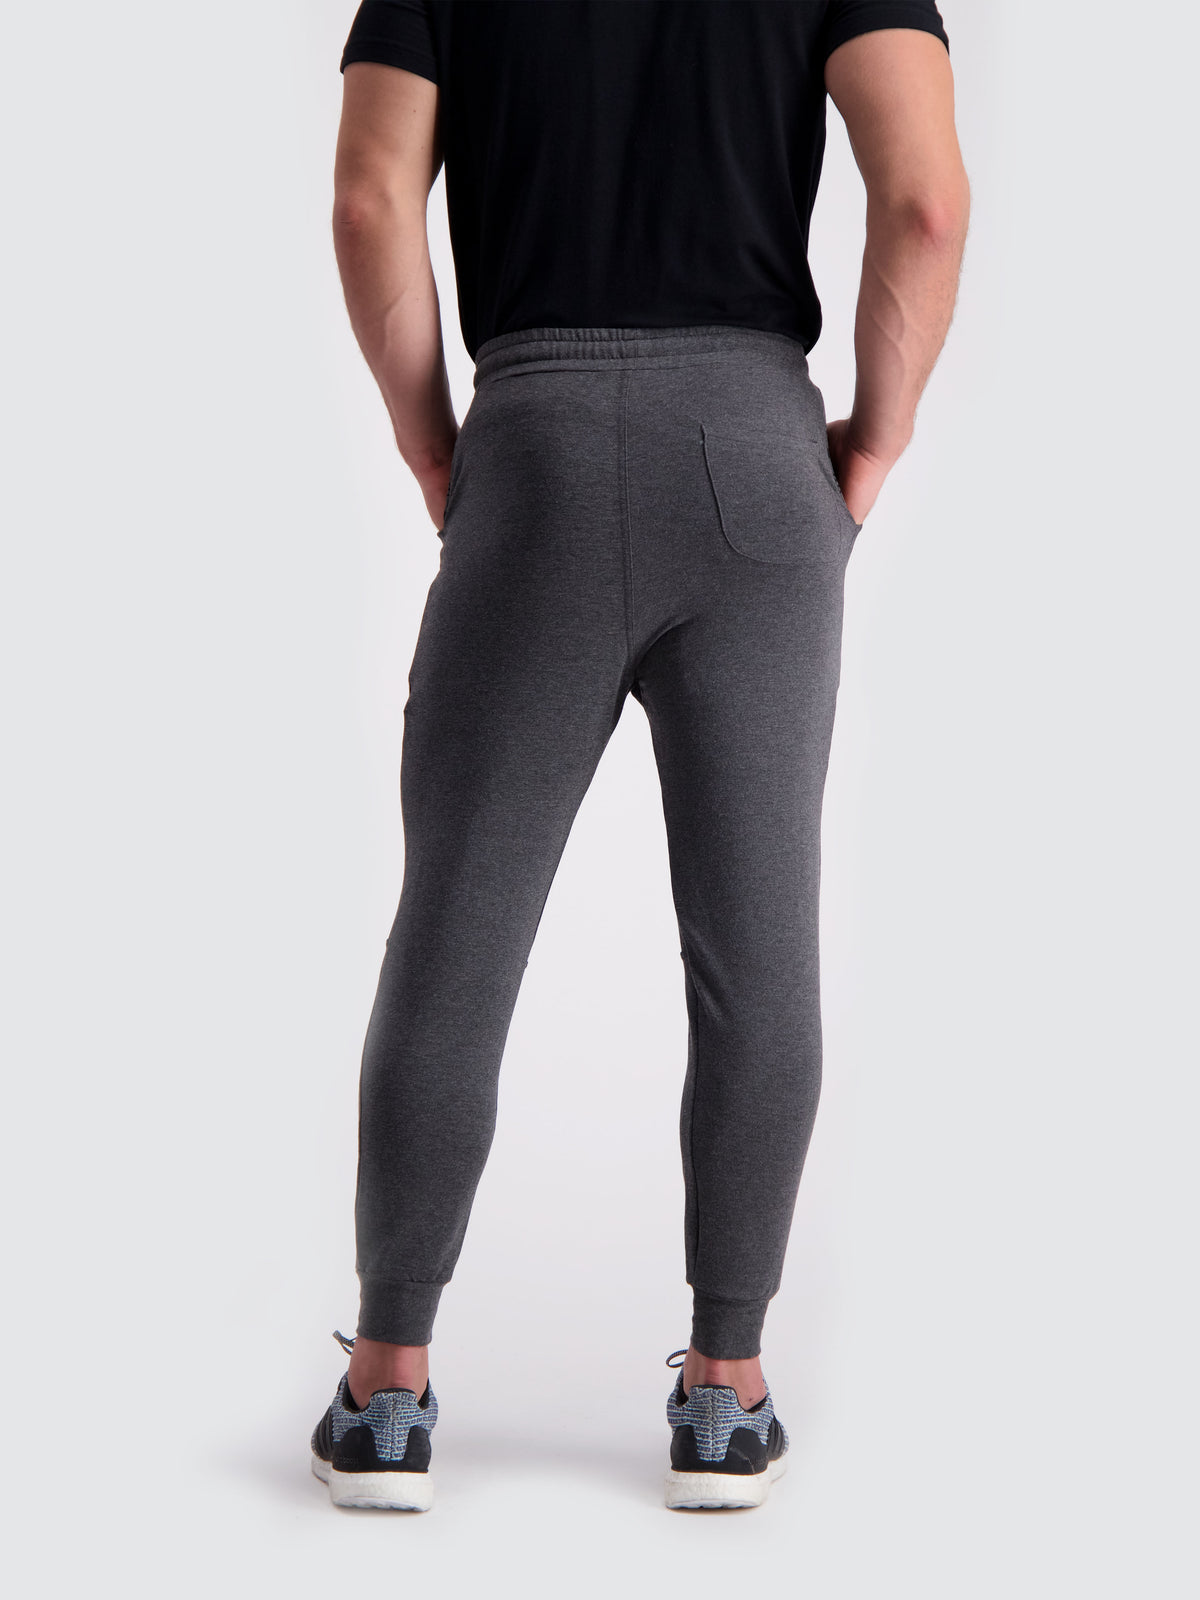 Two Blind Brothers - Mens Men's Impractical Jogger Charcoal